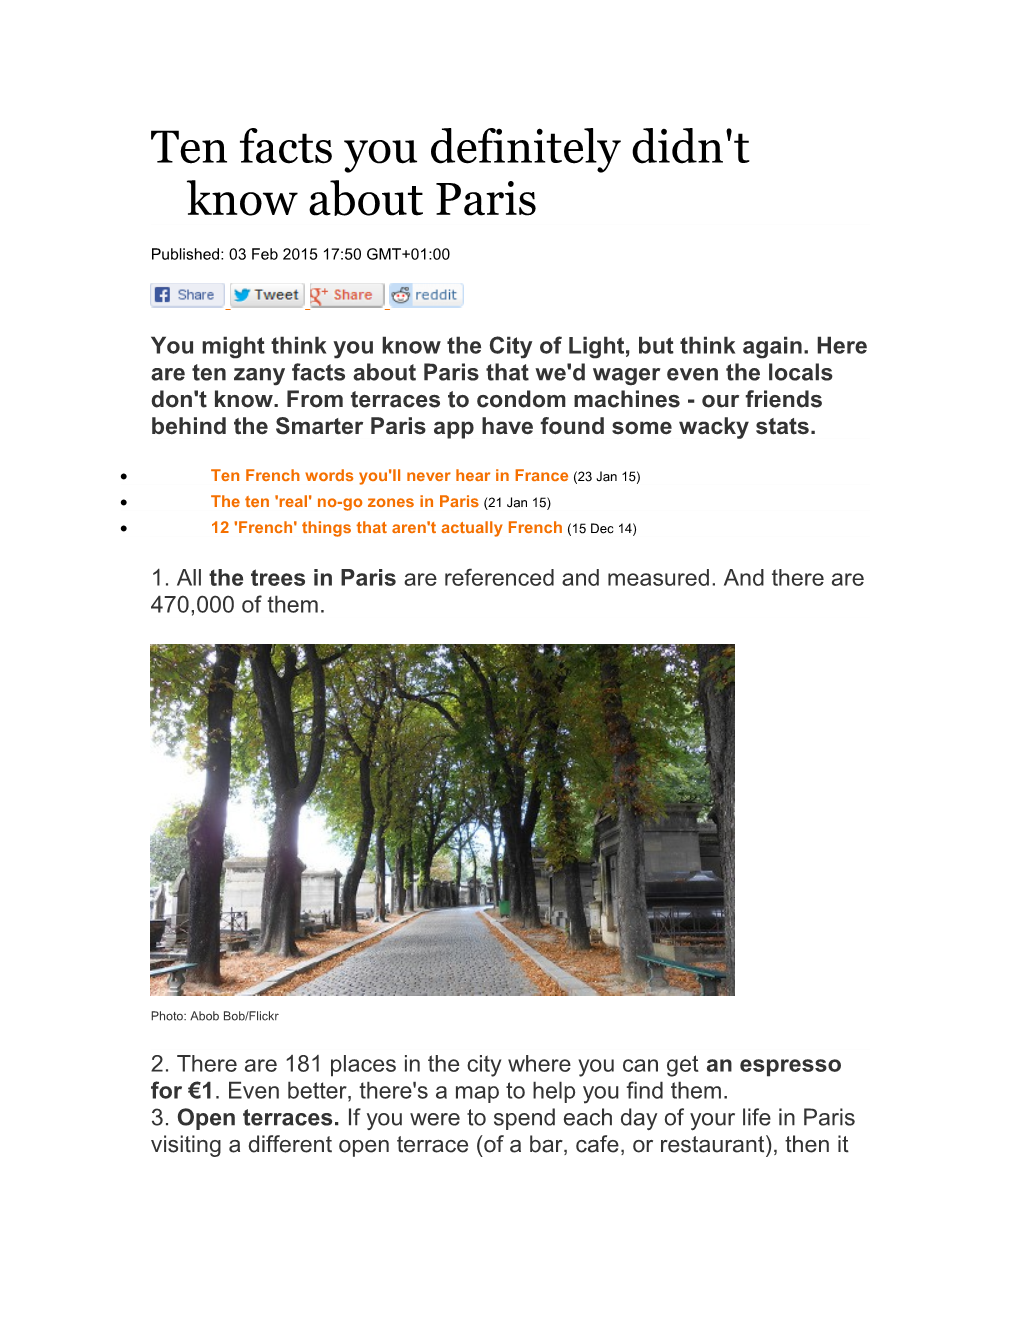 Ten Facts You Definitely Didn't Know About Paris